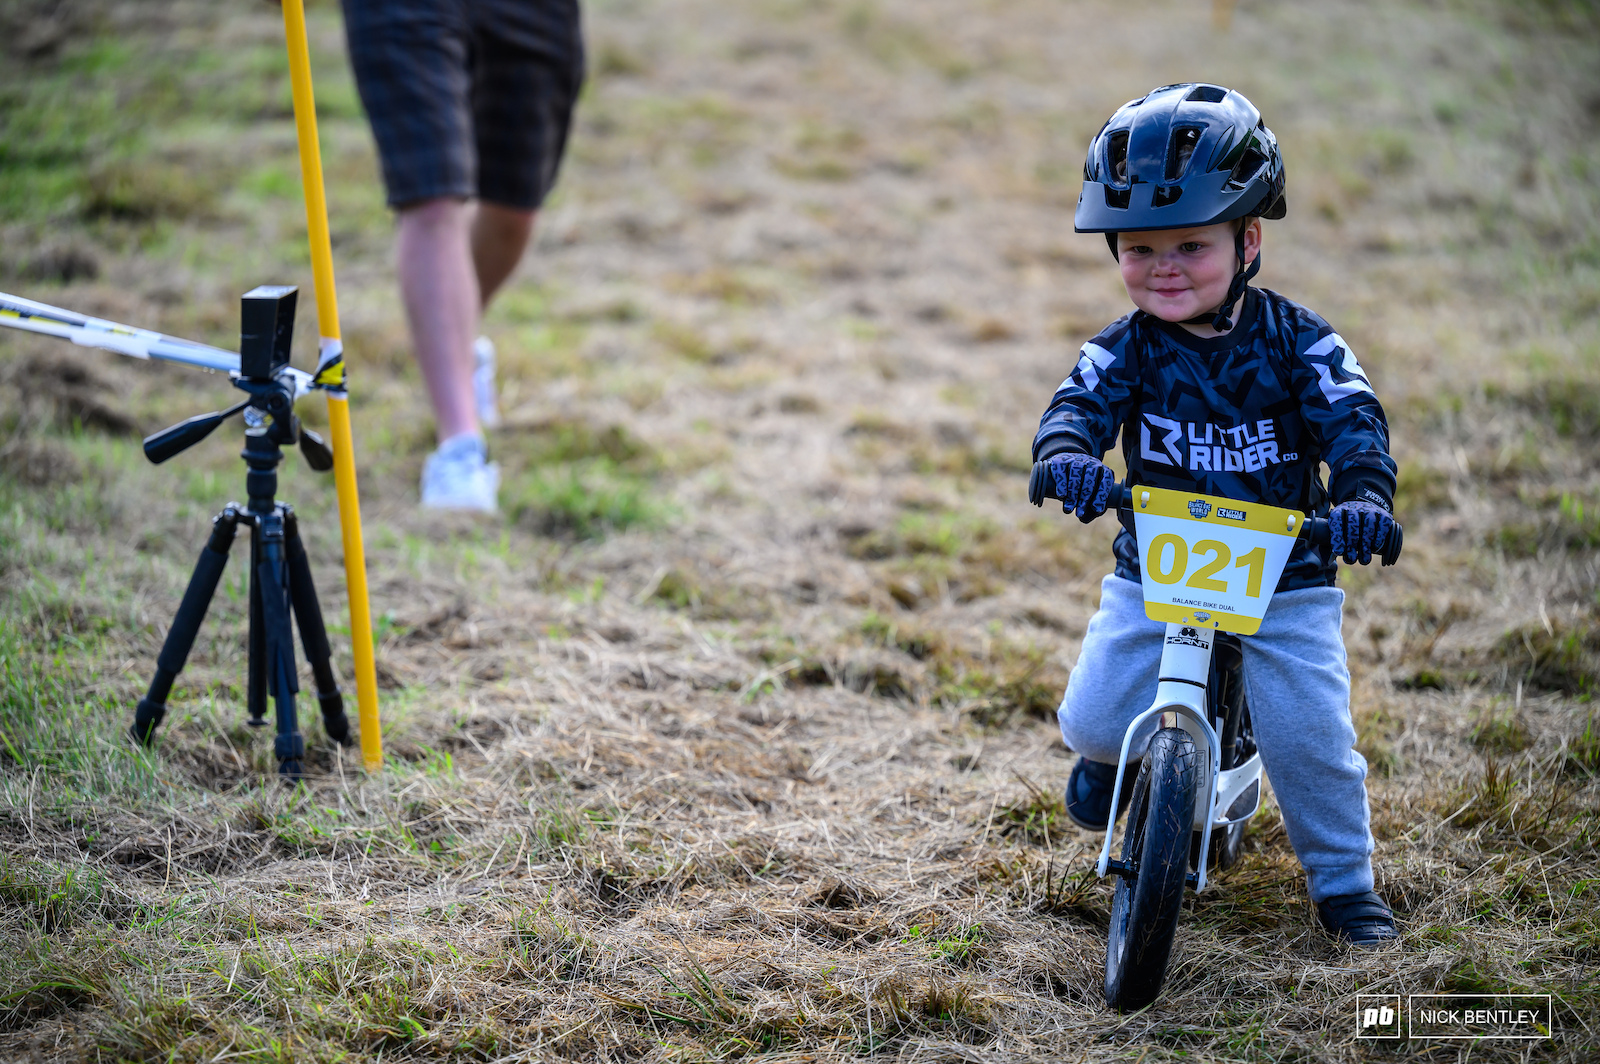 It was tough for these little riders on little wheels with some deep ruts at the end of the course